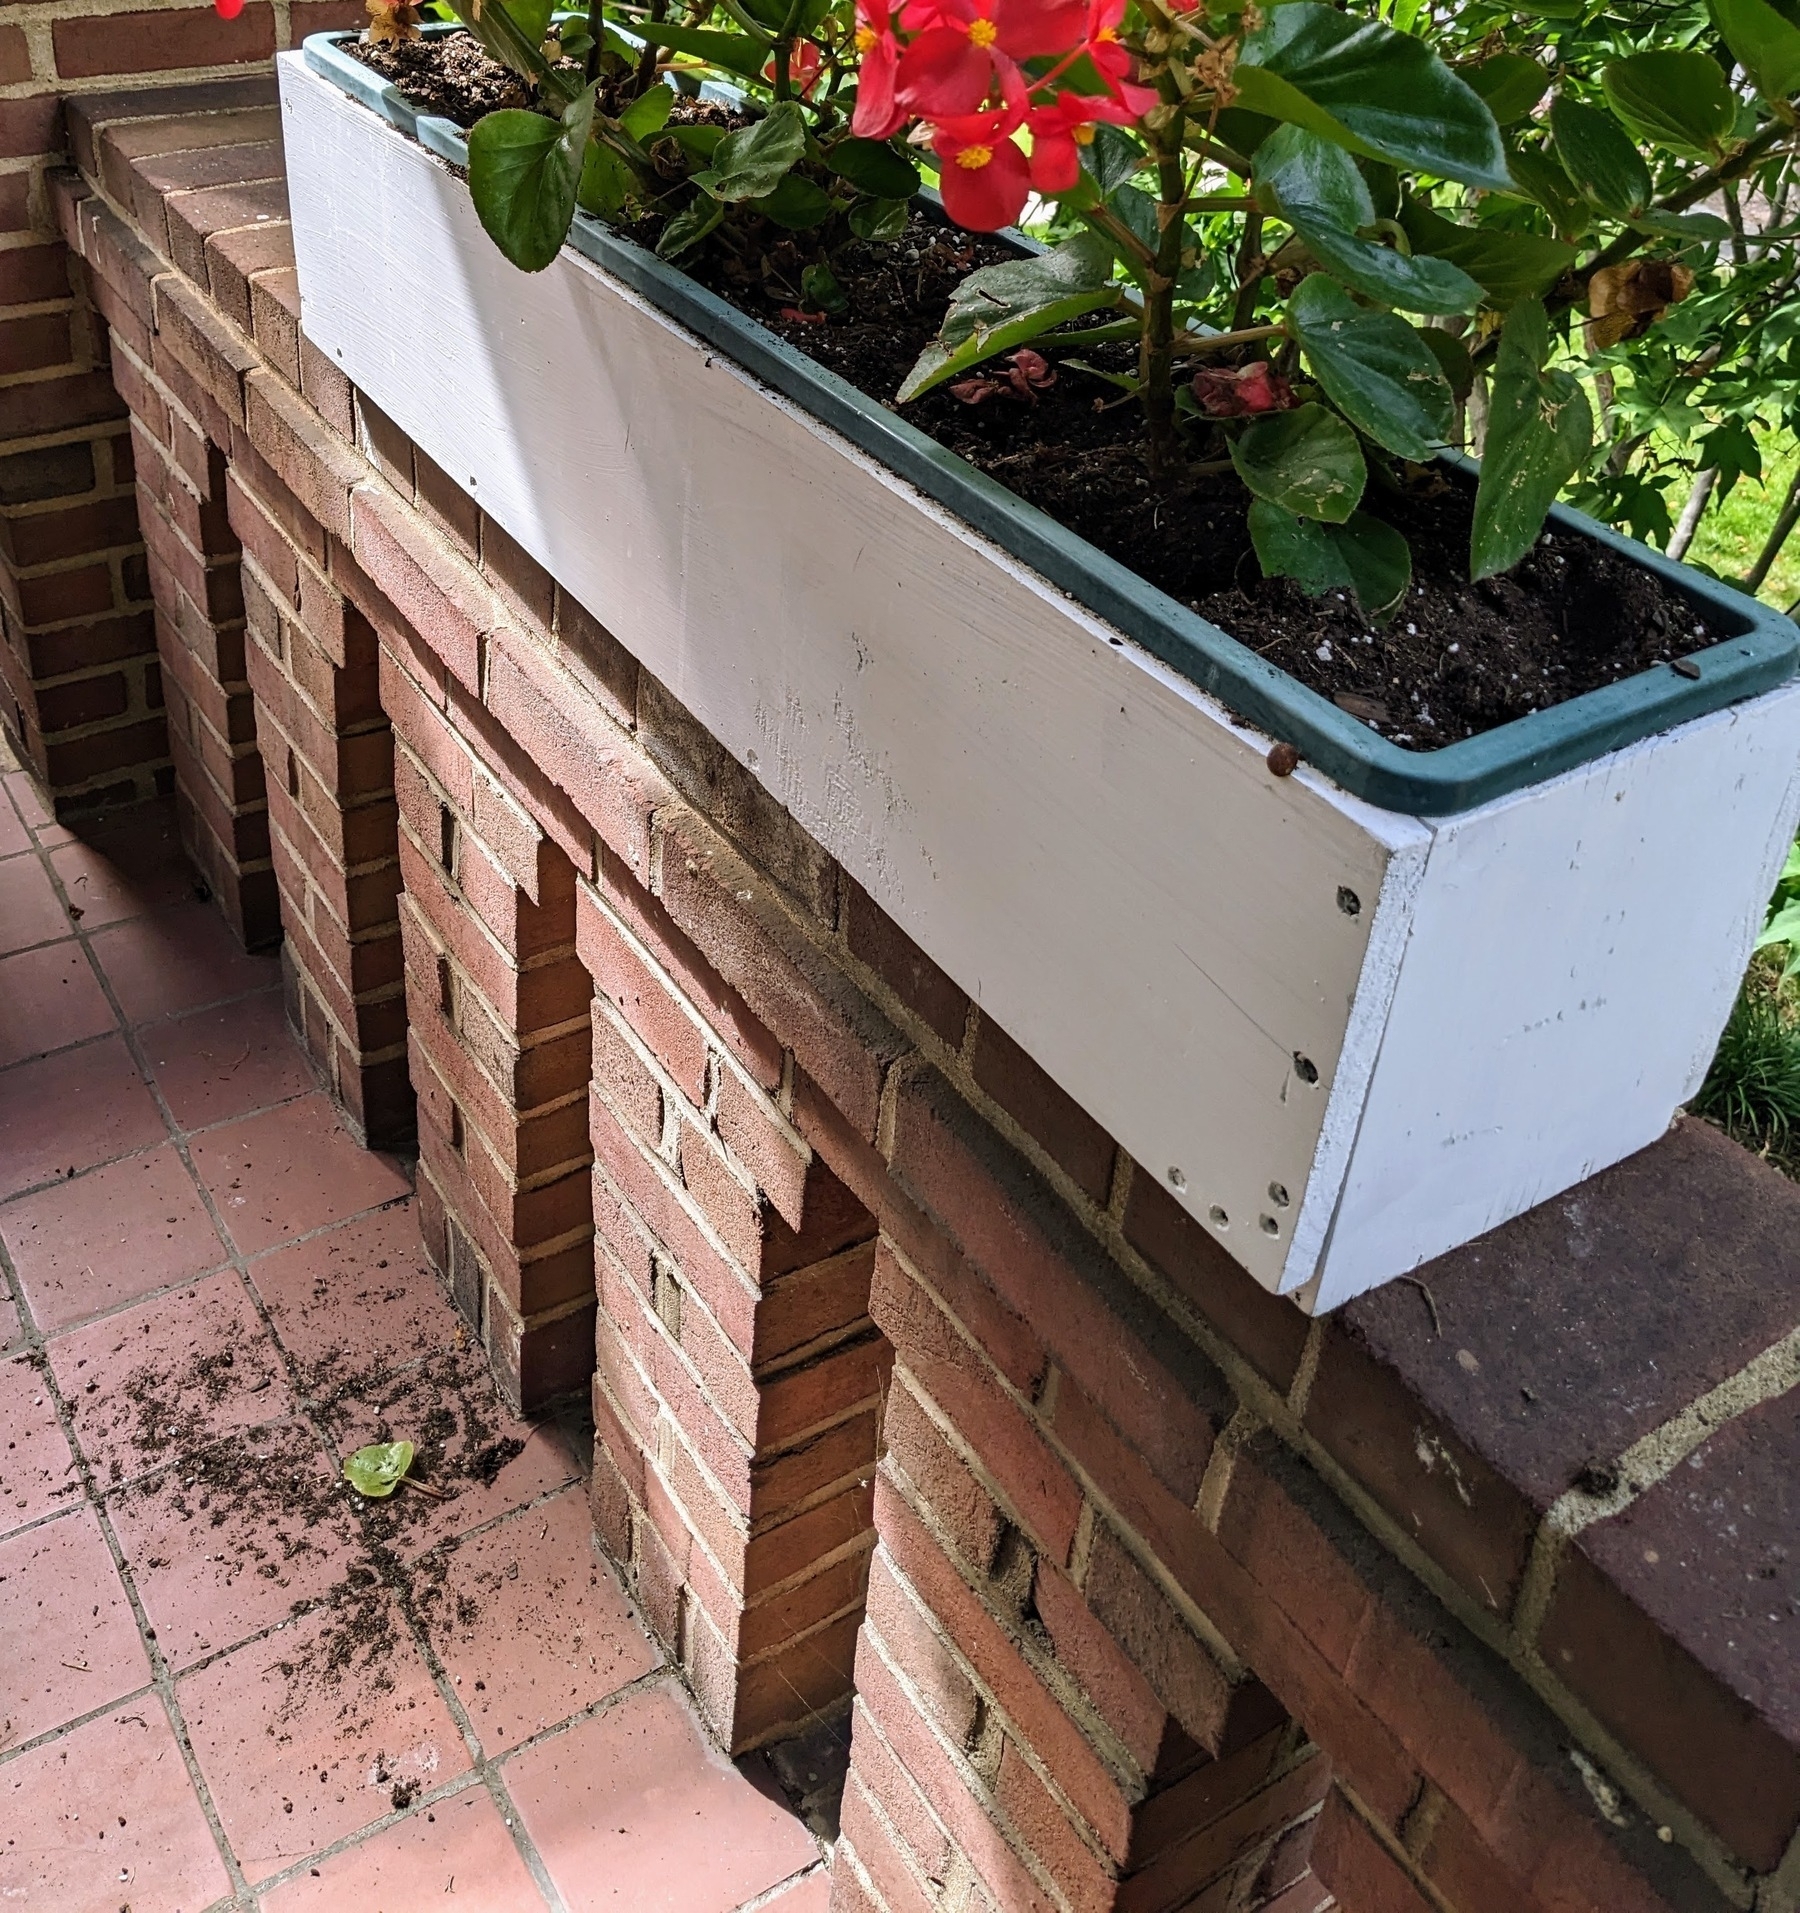 flower box on a porch with a pile of dirt on the ground